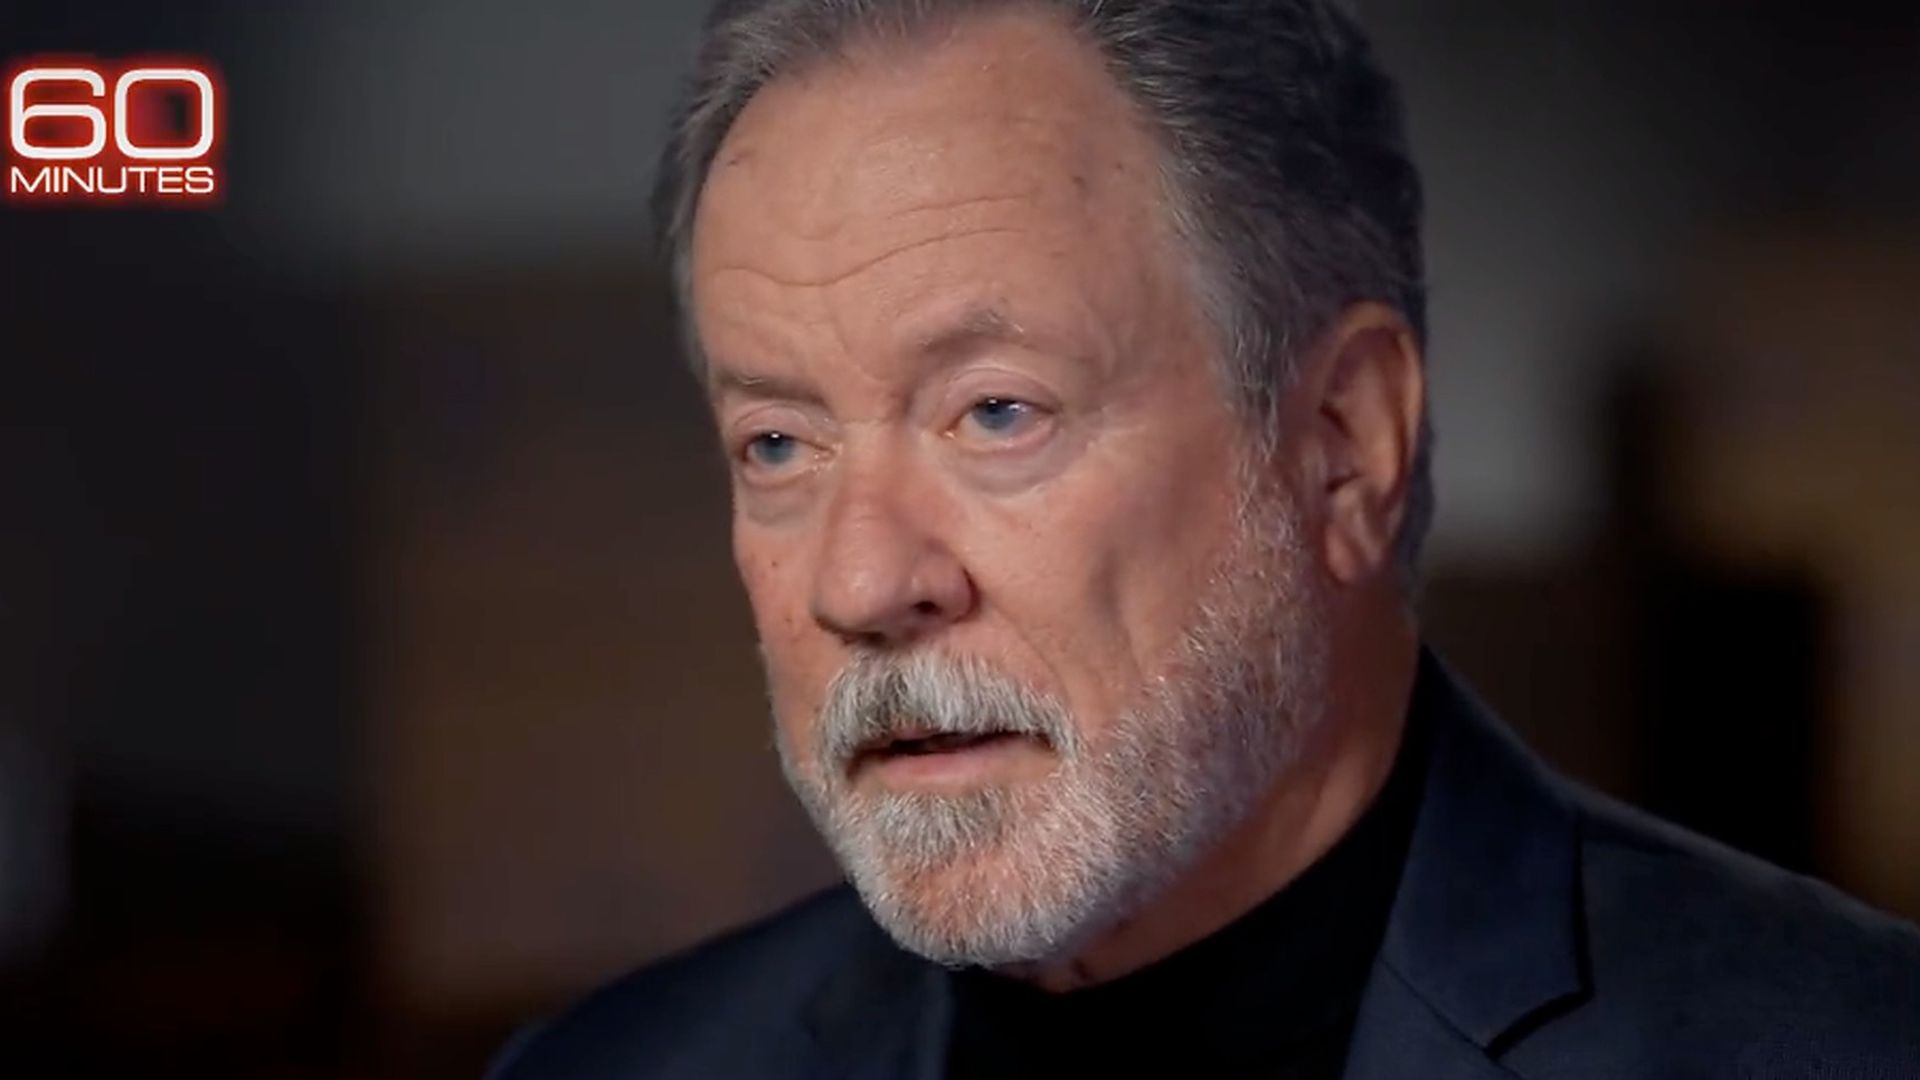 A screenshot of United Nations World Food Program chief David Beasley during his interview on CBS' "60 Minutes" that aired Sunday.